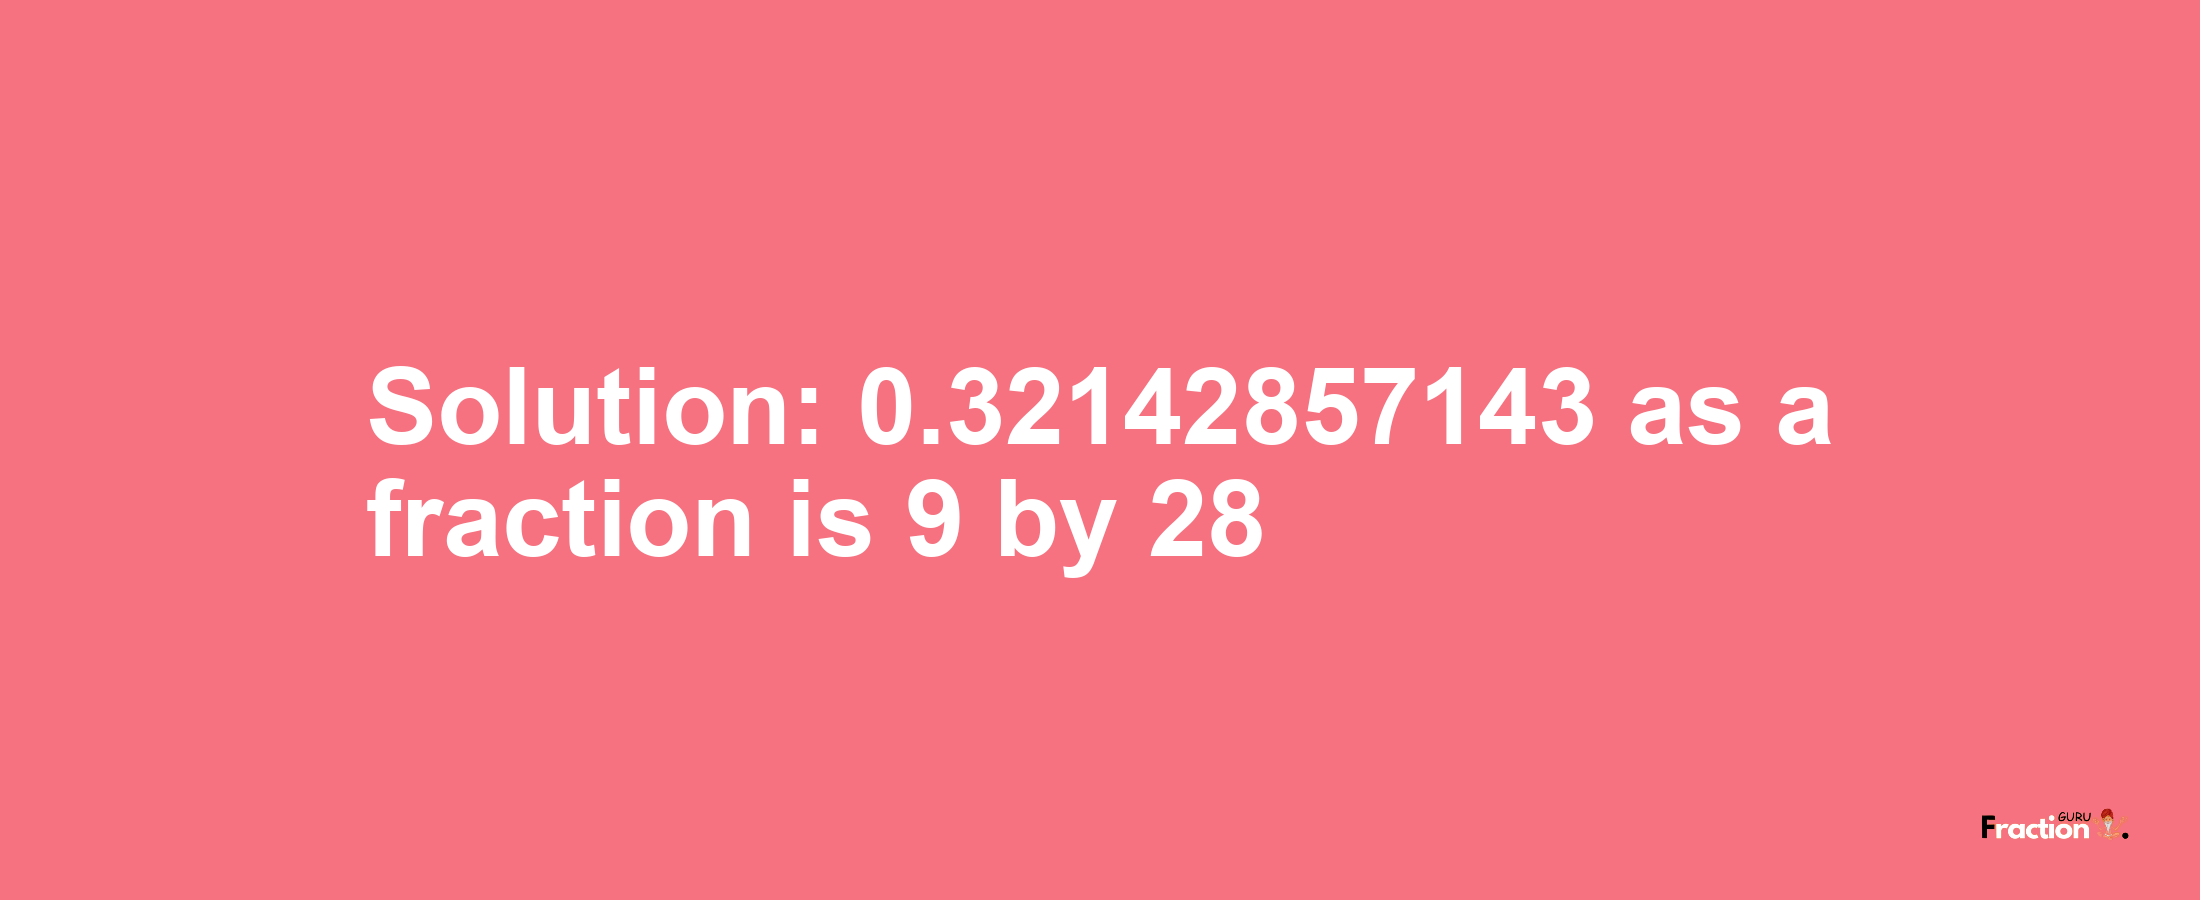 Solution:0.32142857143 as a fraction is 9/28